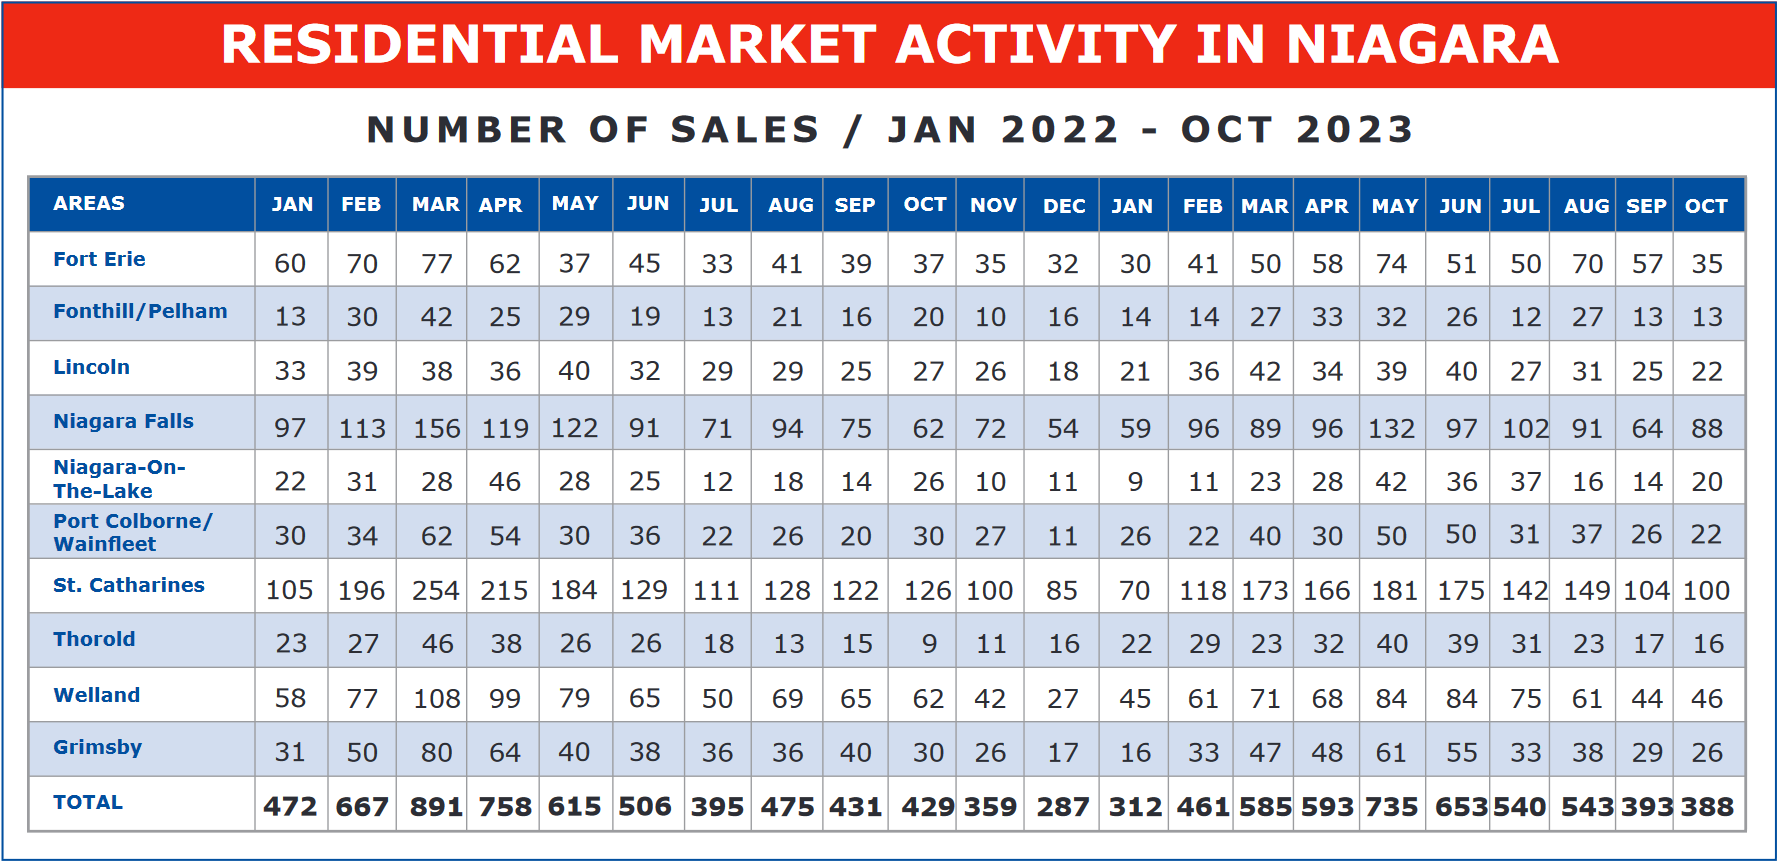 CHART 2 RESIDENTIAL MARKET ACTIVITY IN NIAGARA NUMBER OF SALES / JAN. 2022 – OCT. 2023